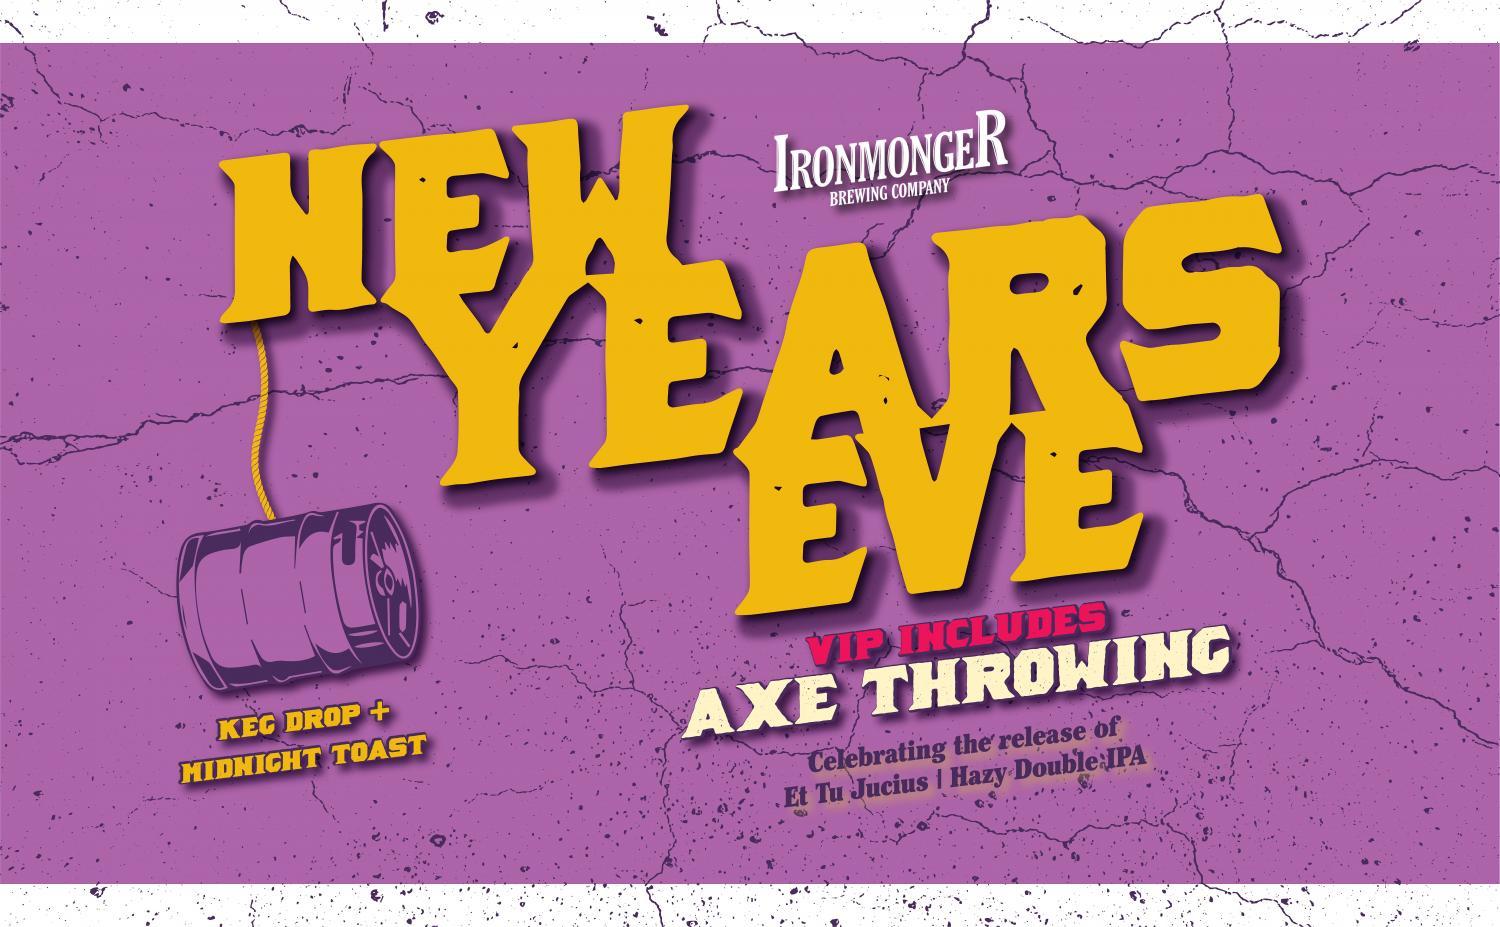 New Year's Eve Party + Axe Throwing